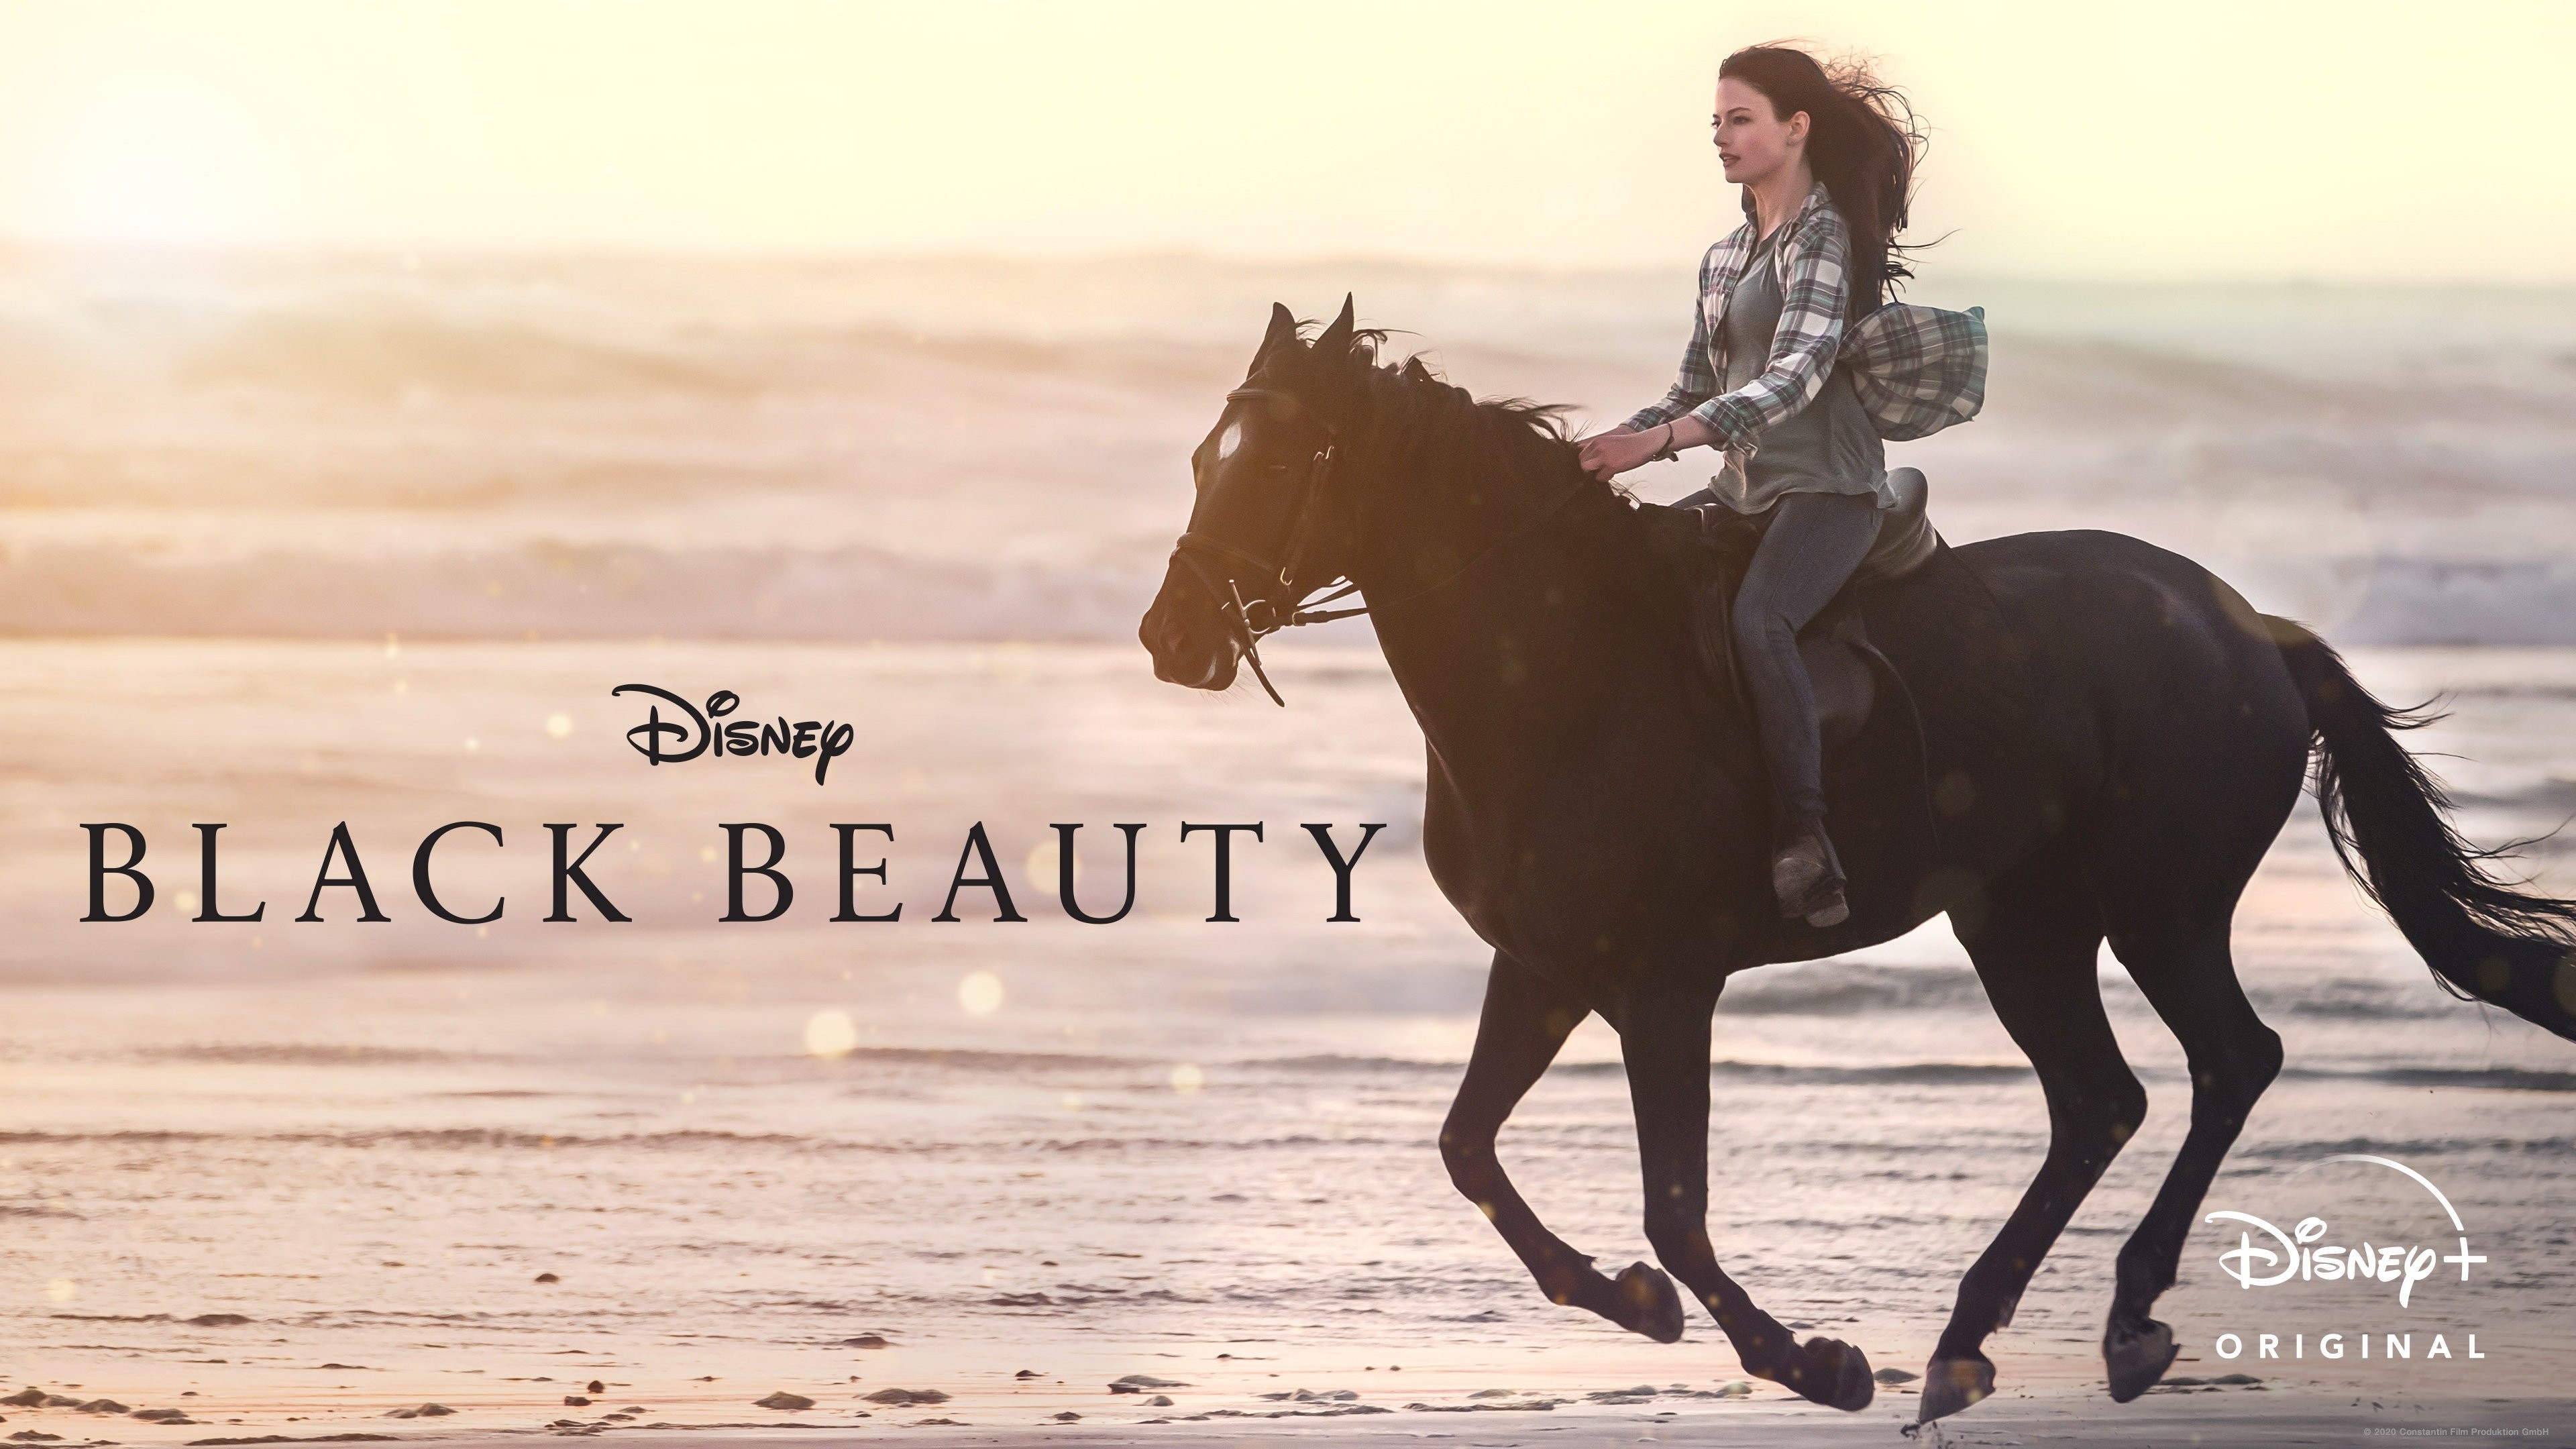 Disney Plus' take on Black Beauty is the ultimate horse girl movie - Polygon